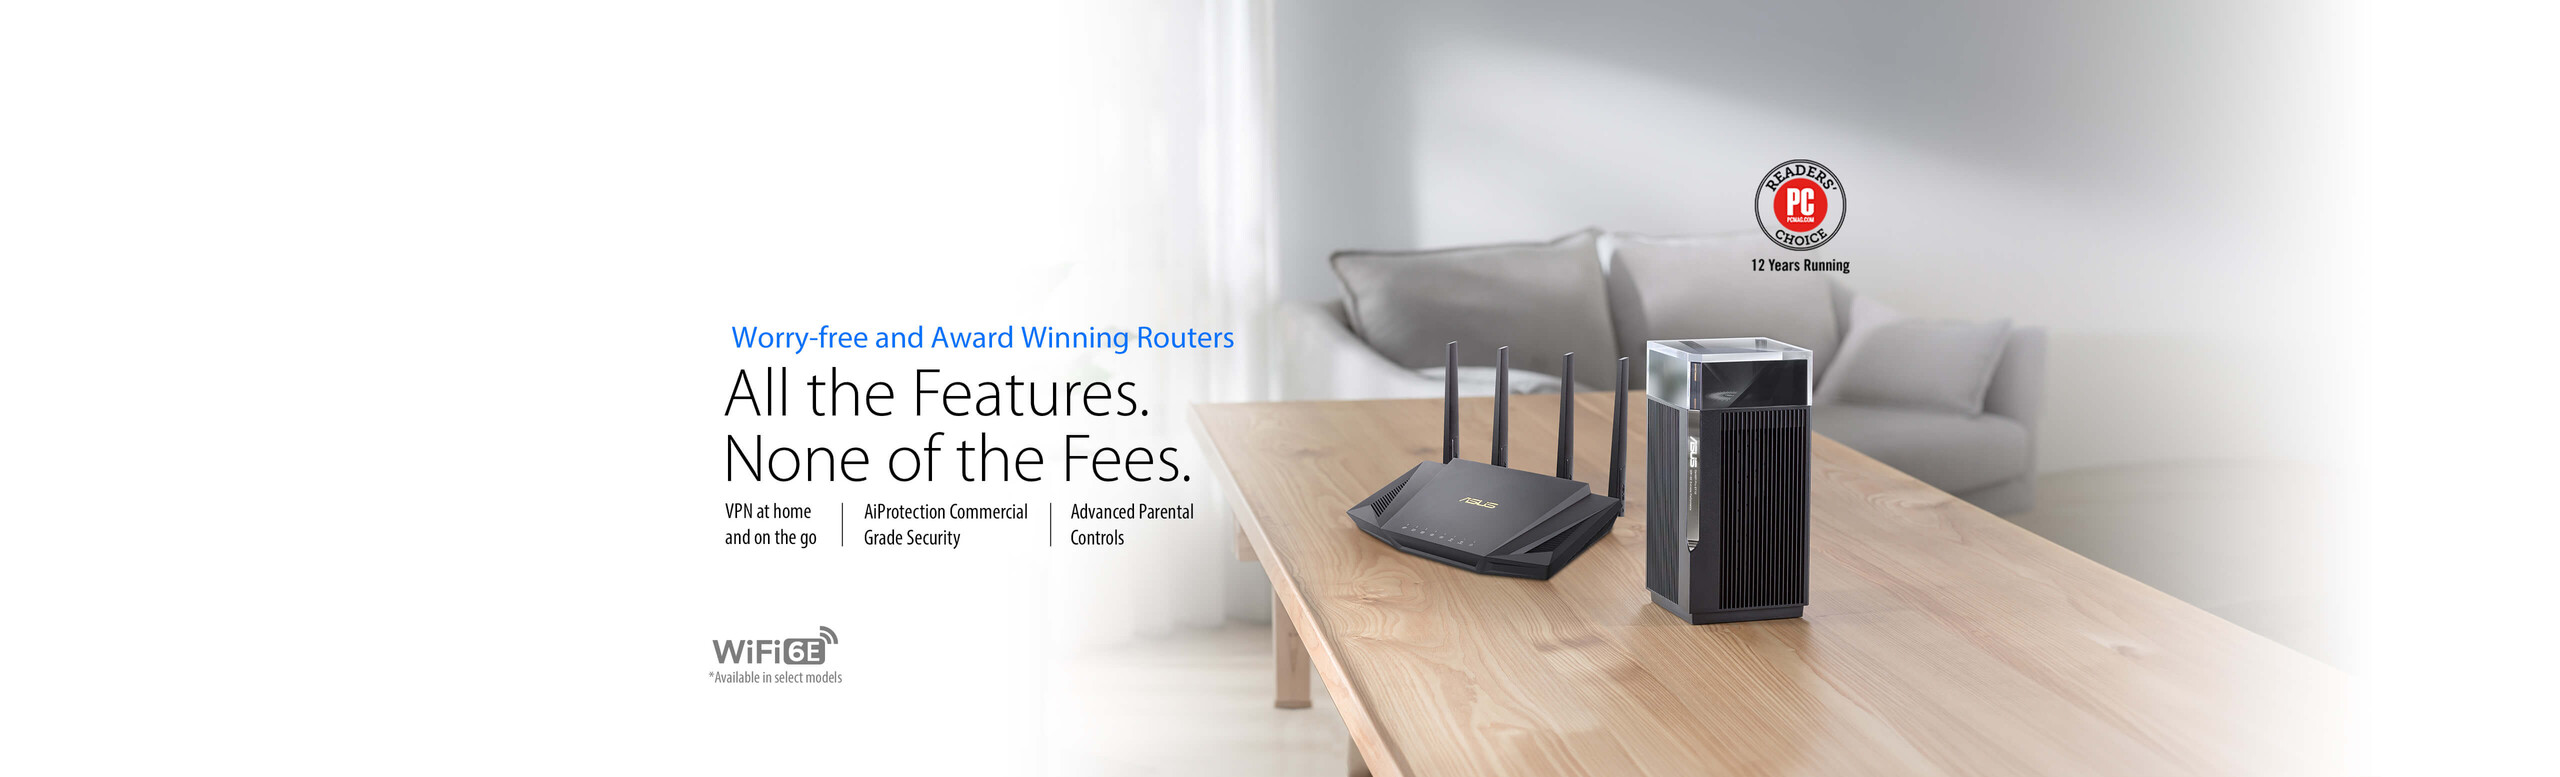 Worry-free and Award Winning Routers